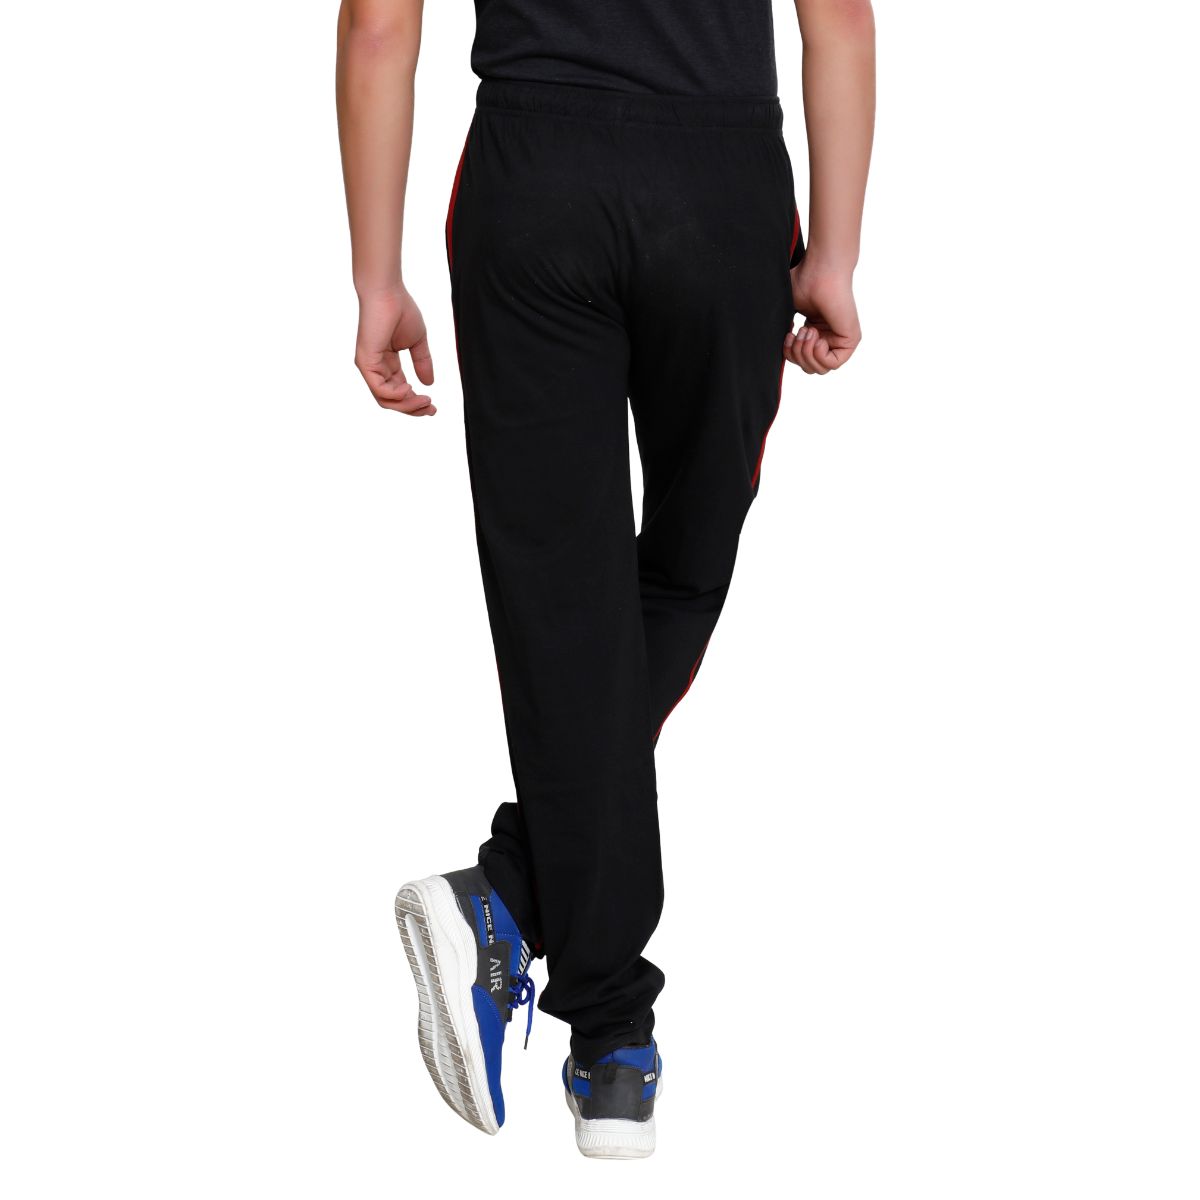 Buy Men Off-White Premium 2.0 Cricket Track Pant From Fancode Shop.